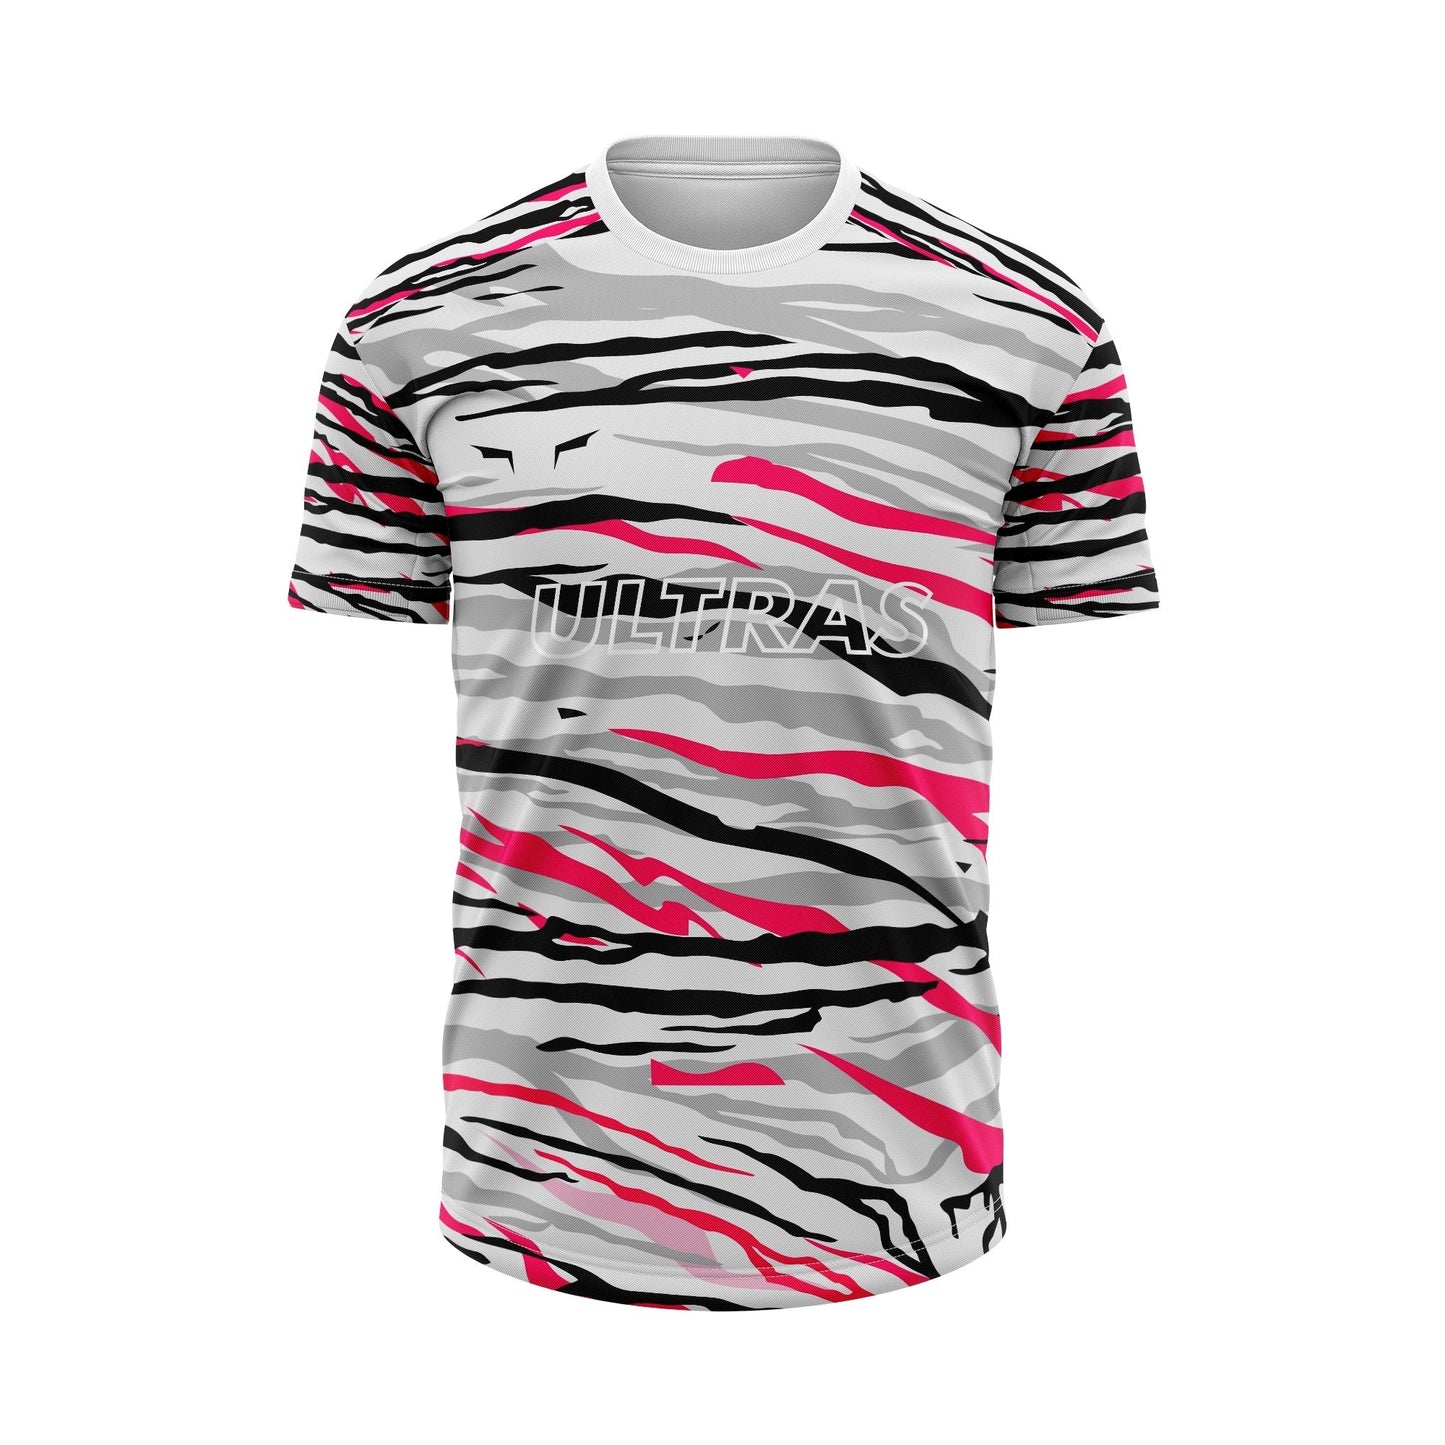 thelegalgang,Indian Ultras - Reactive Concept Football Jersey,JERSEY.